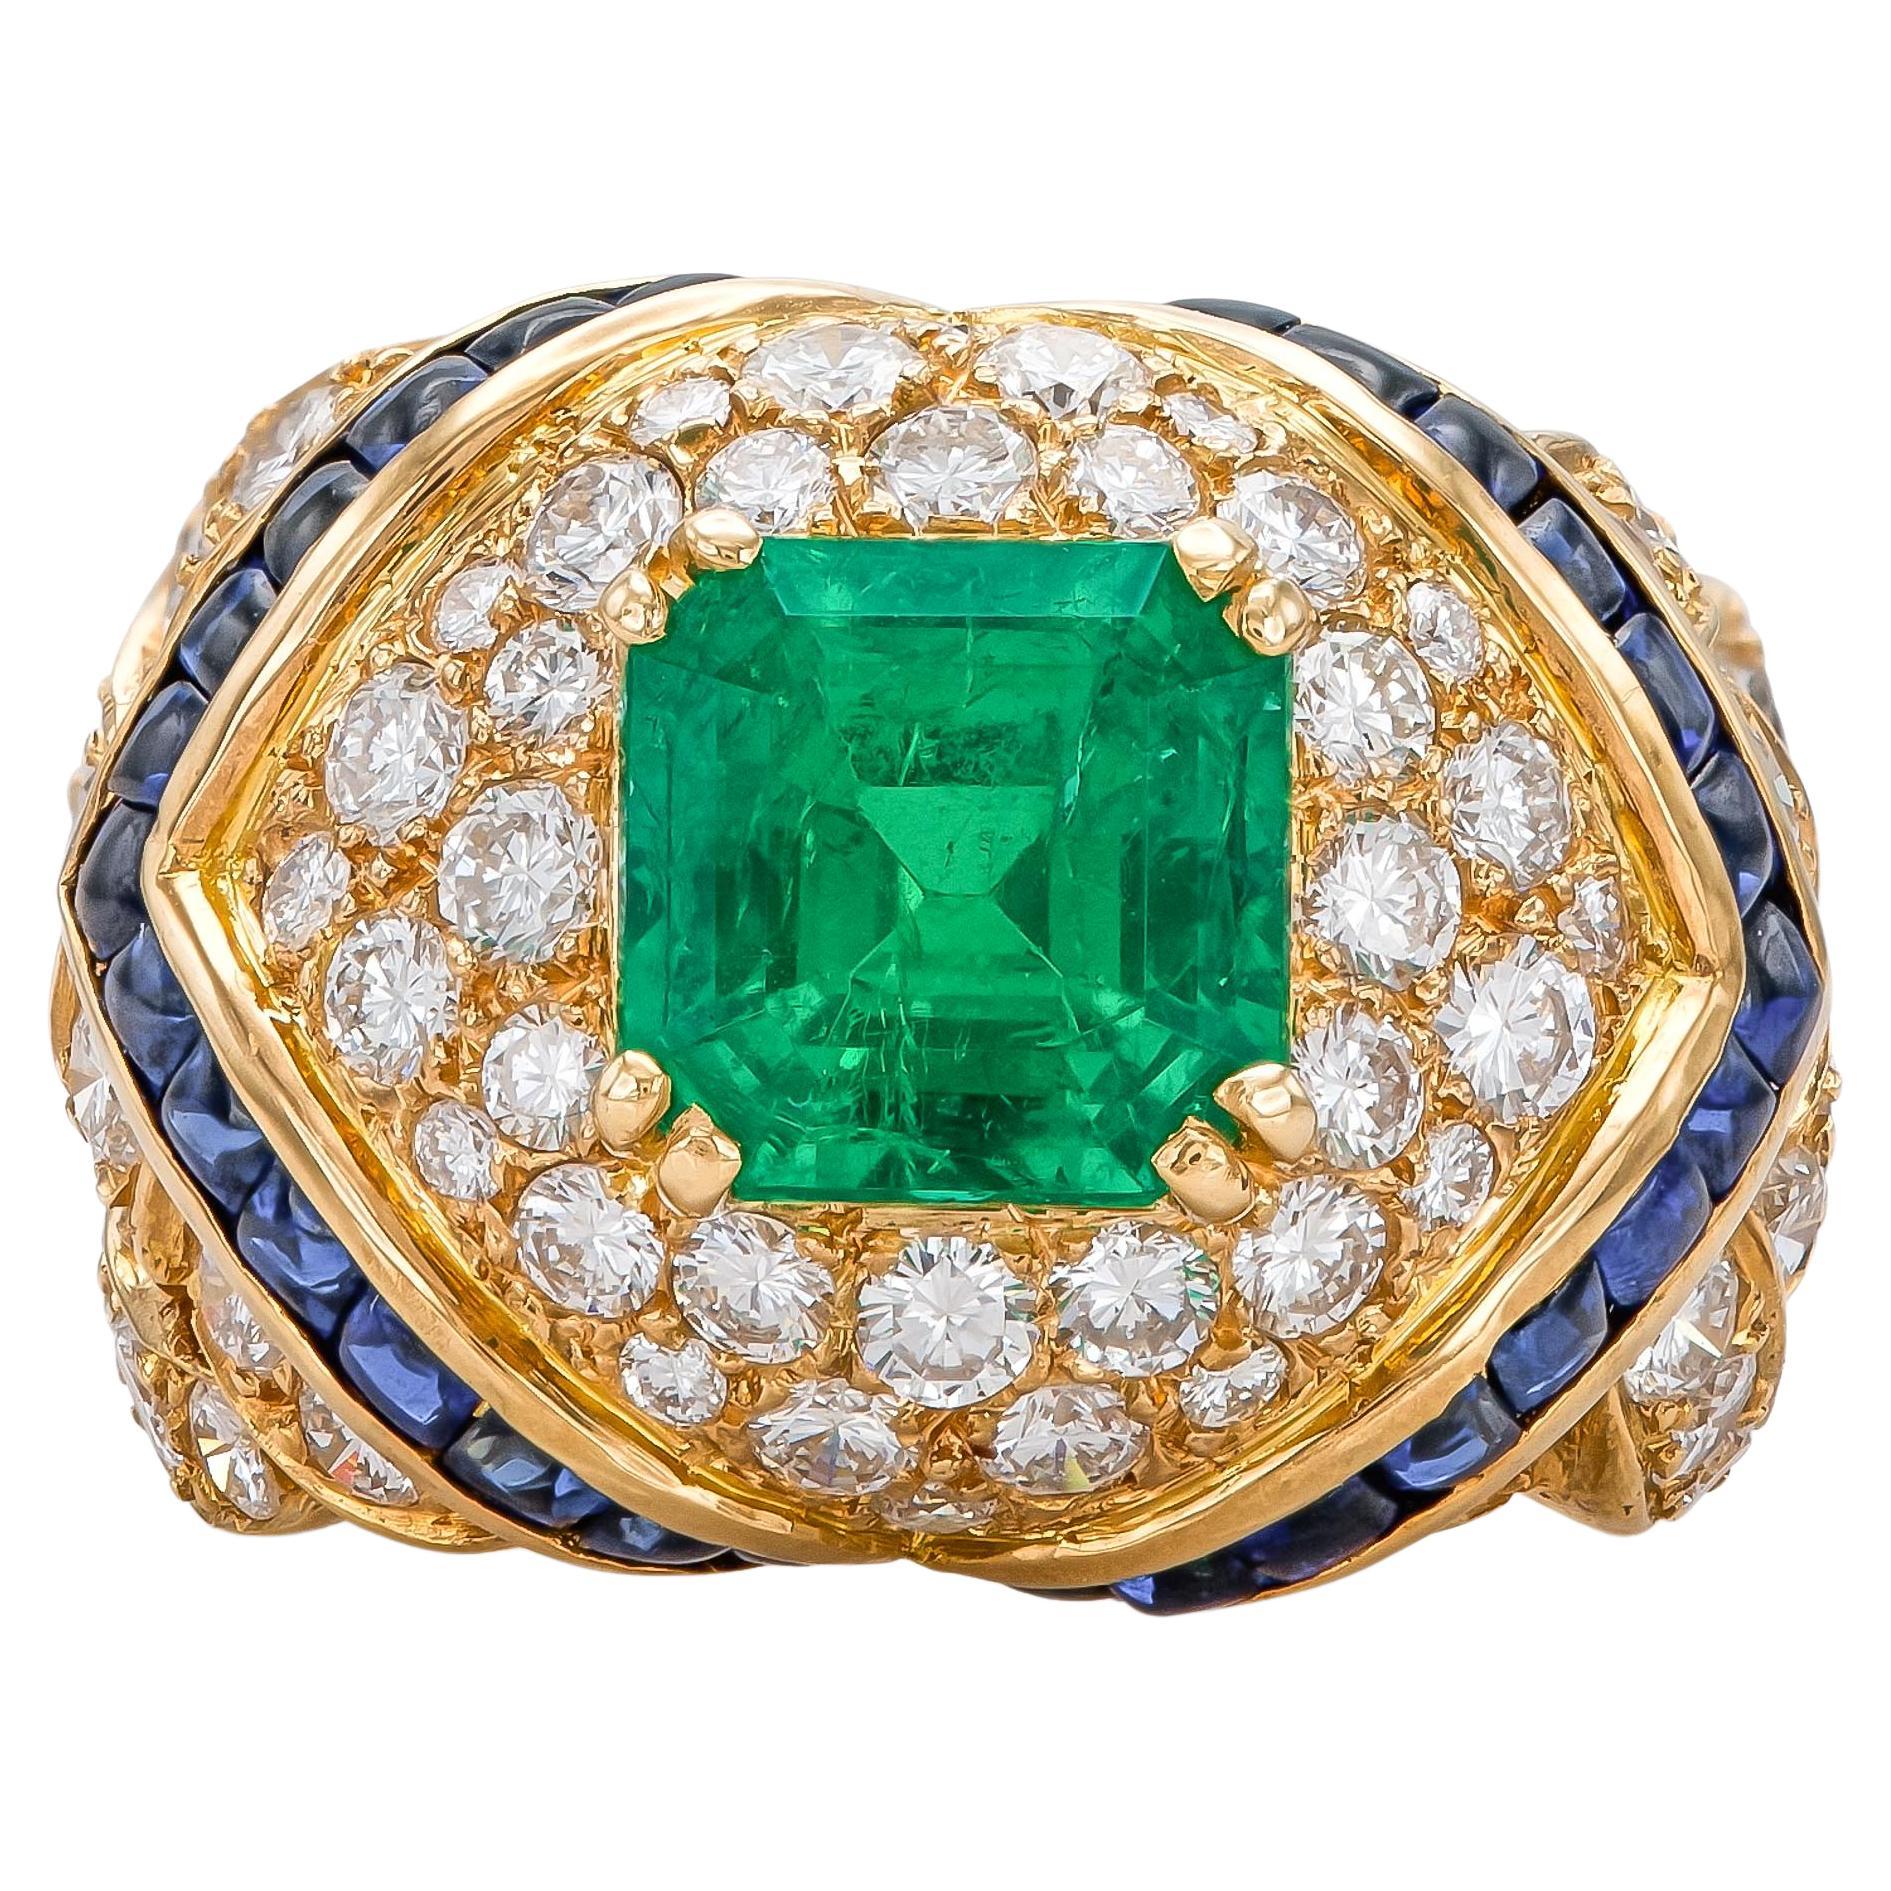 Vintage 1980s Mauboussin Emerald Ring with Diamonds and Sapphires For Sale